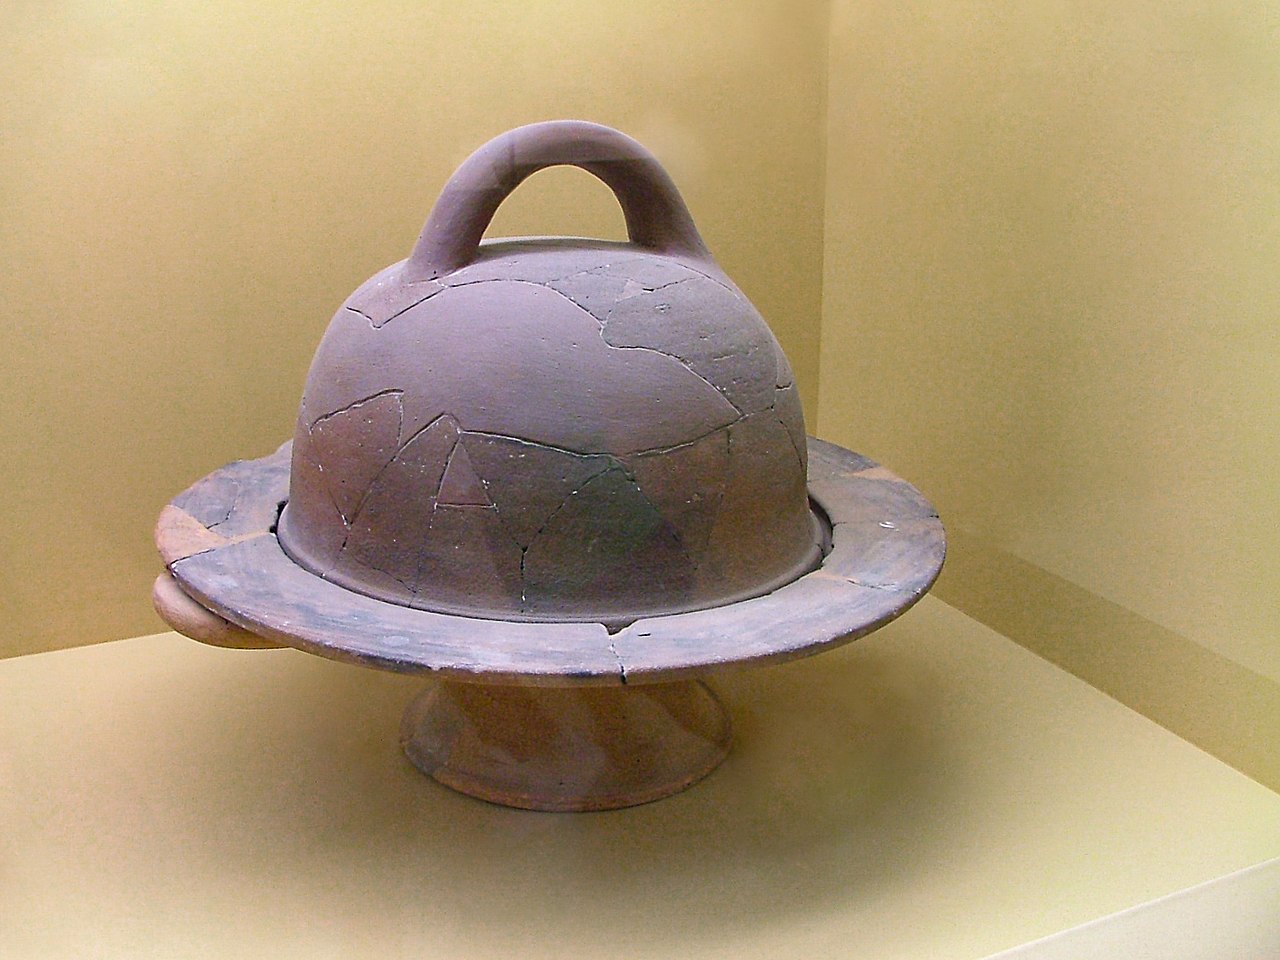 https://upload.wikimedia.org/wikipedia/commons/thumb/3/32/Ancient_Greek_shallow_cooking_hearth_with_bell-shaped_cover_-_AGMA.jpg/1280px-Ancient_Greek_shallow_cooking_hearth_with_bell-shaped_cover_-_AGMA.jpg